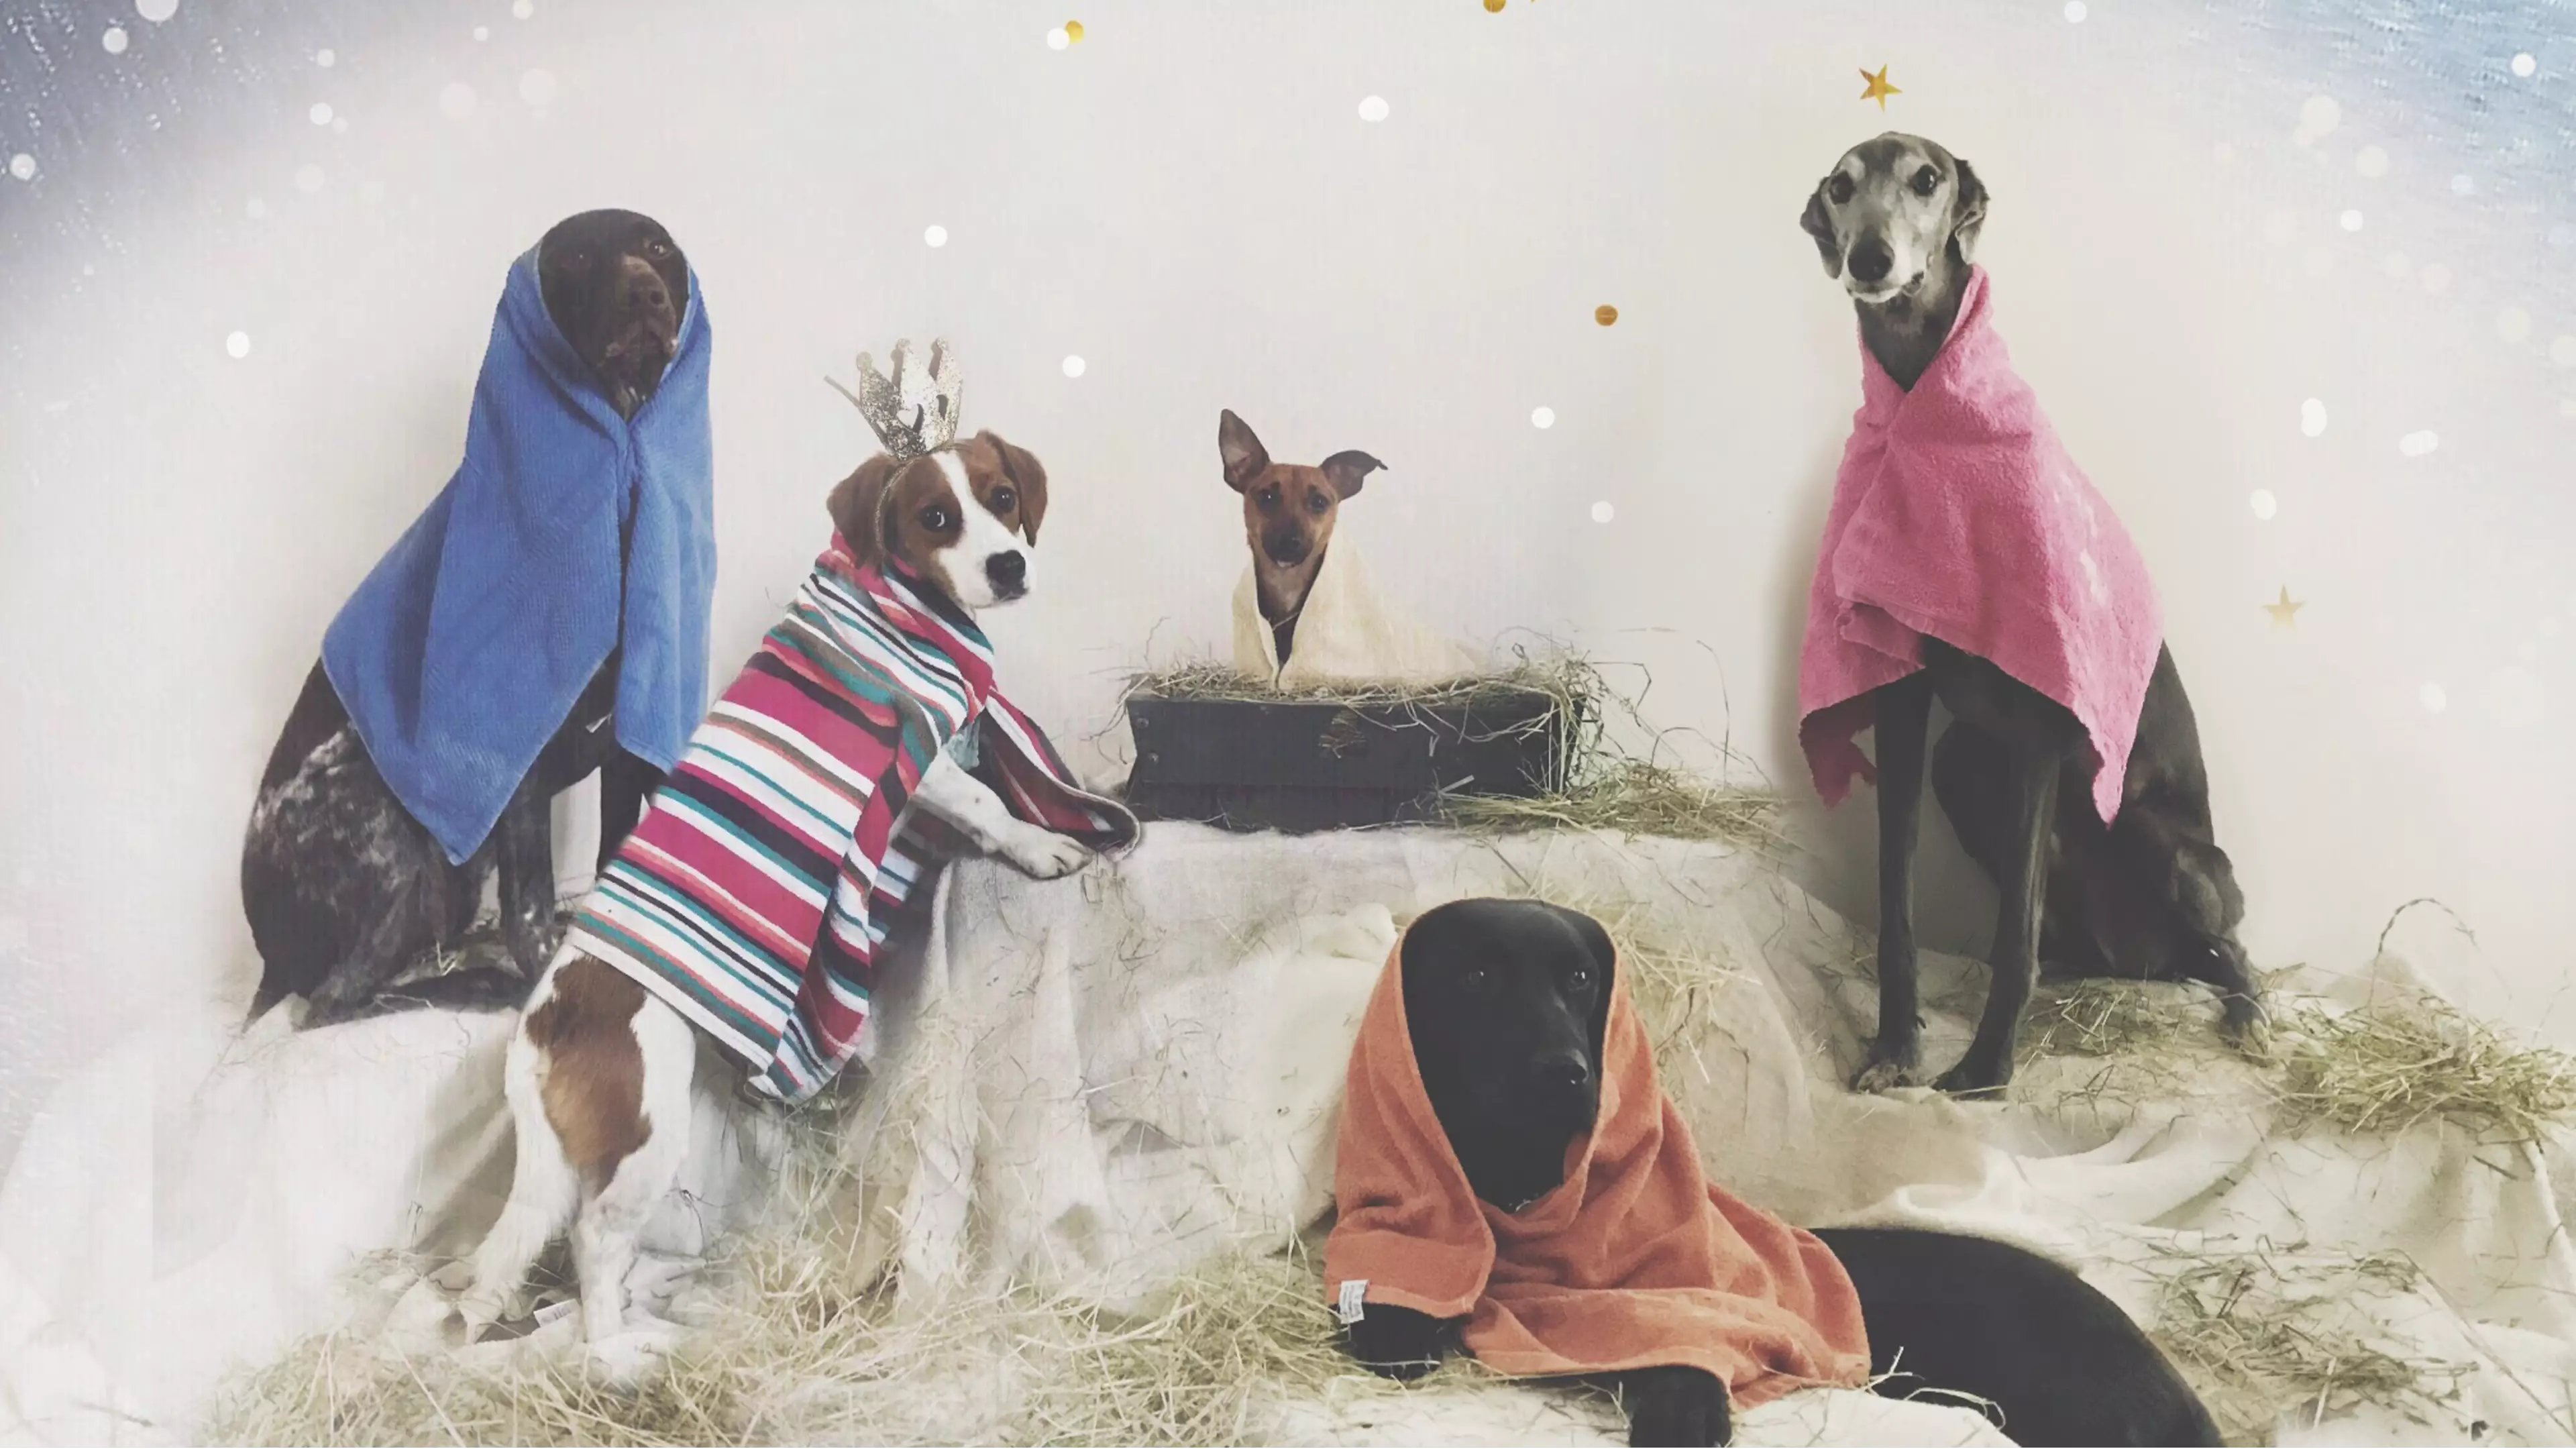 ​Woman Creates Adorable Nativity Scene With Her Dogs